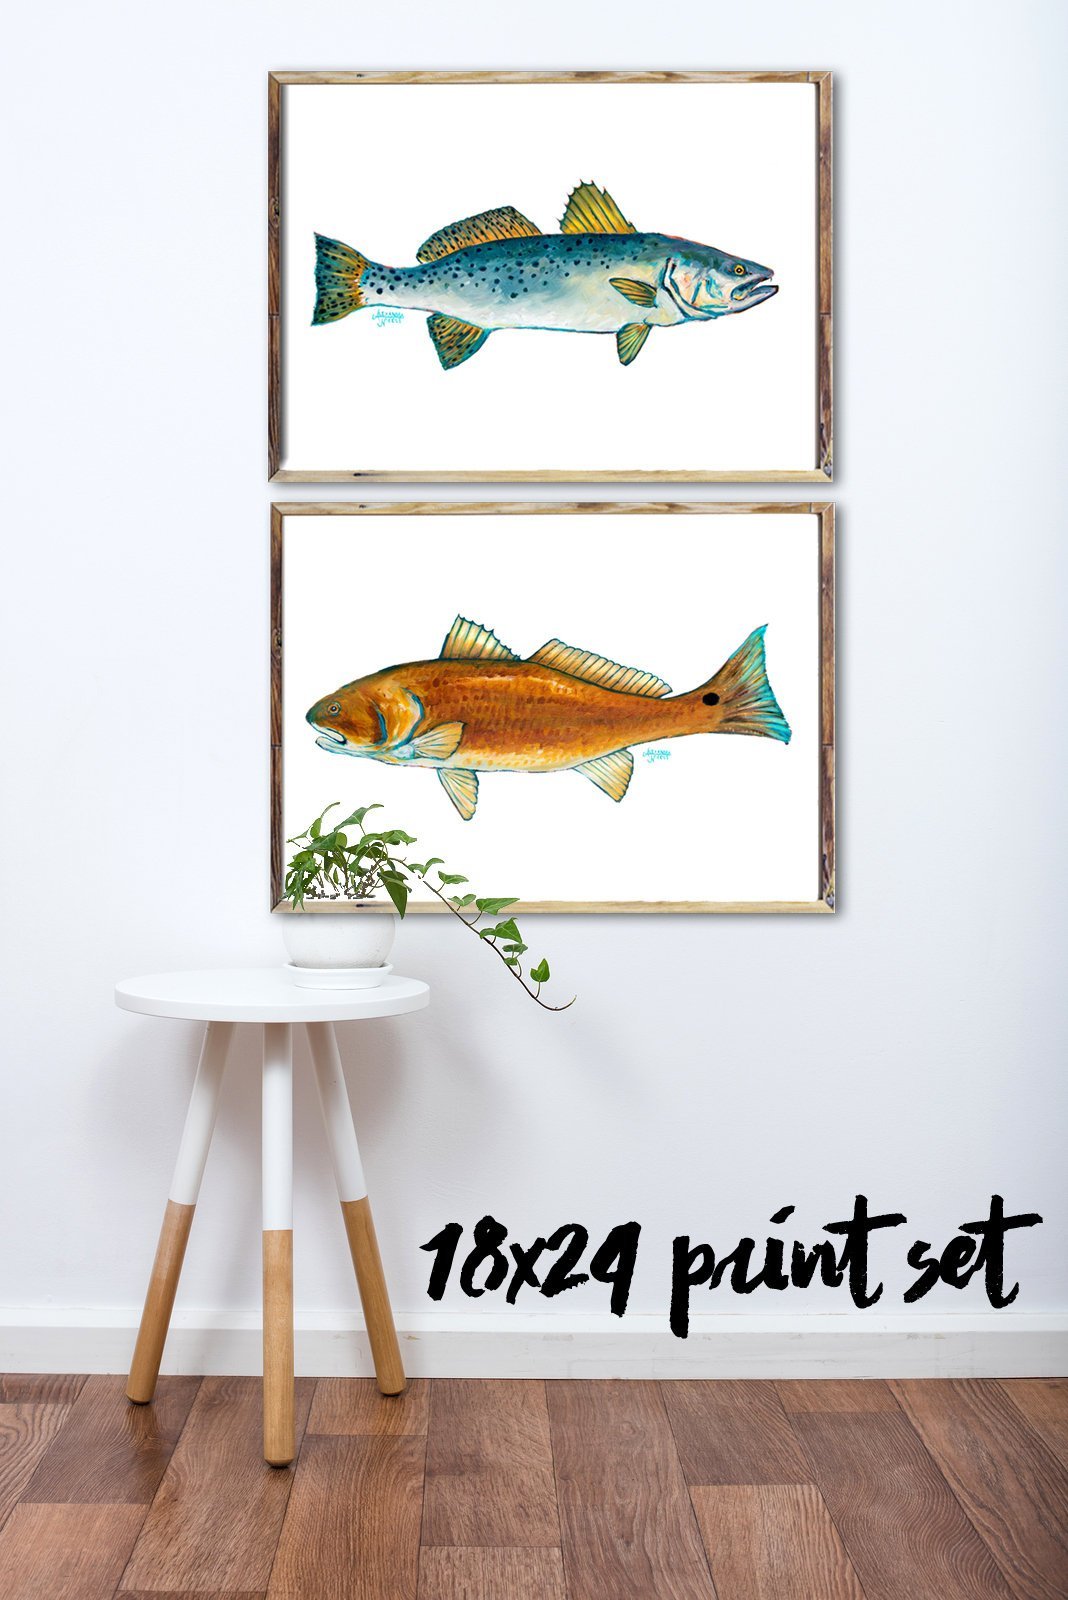 Red Drum and Speckled Trout Fish Print Set - ArtByAlexandraNicole